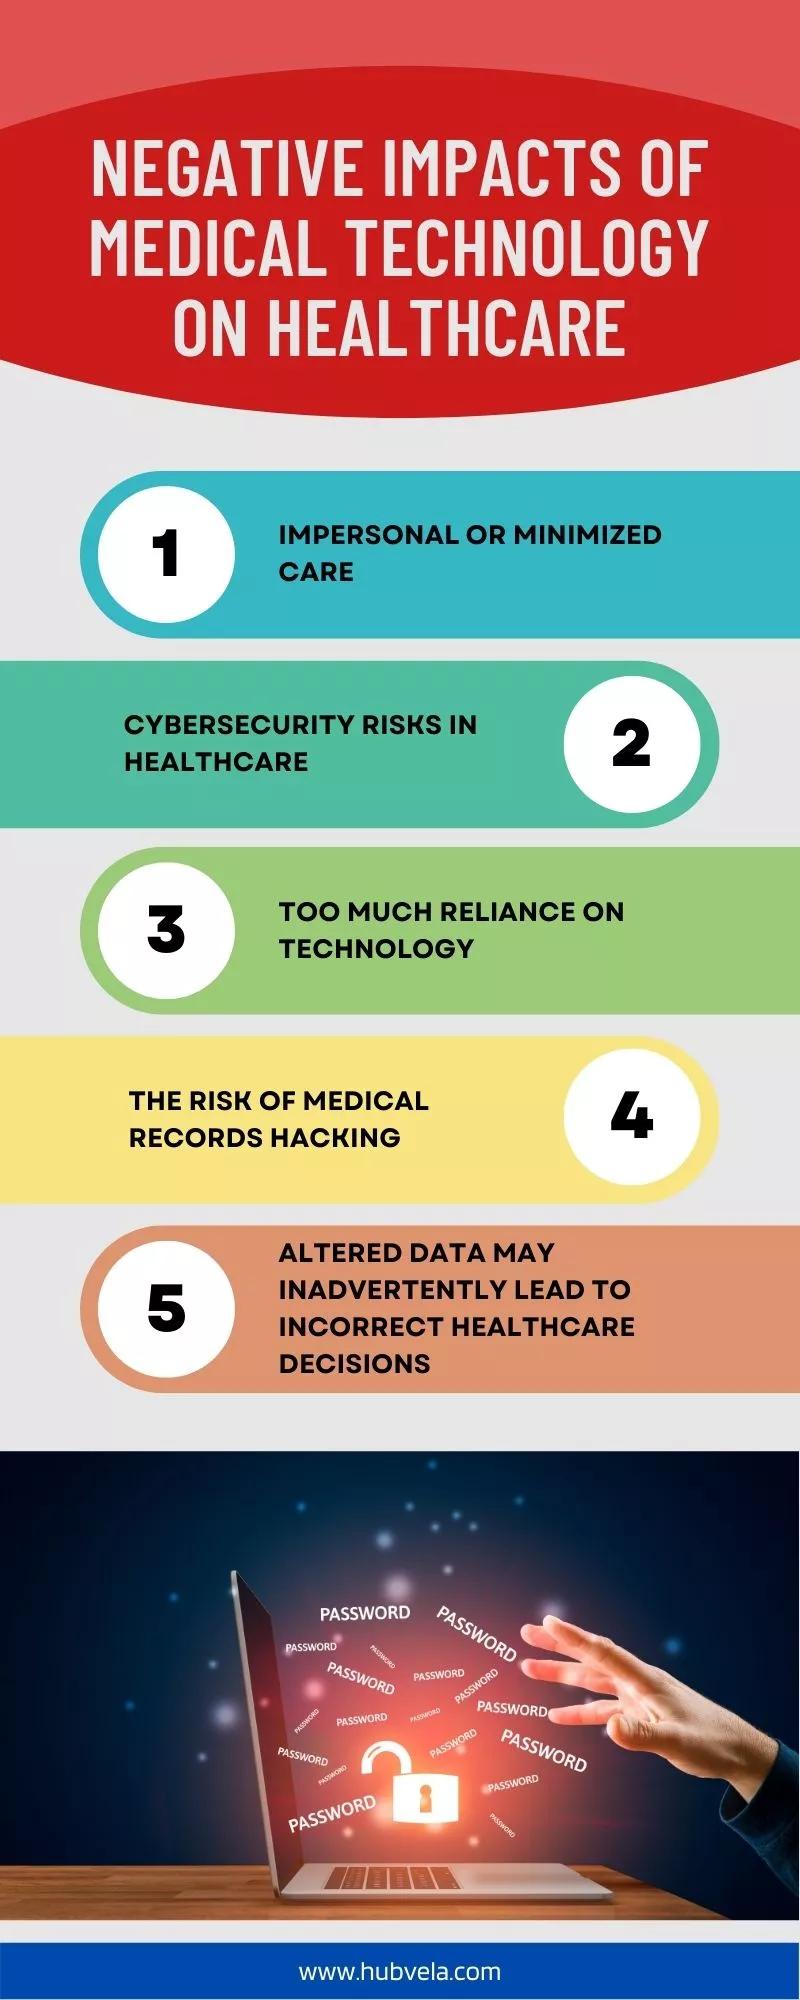 Negative Impacts of Medical Technology on Healthcare infographic